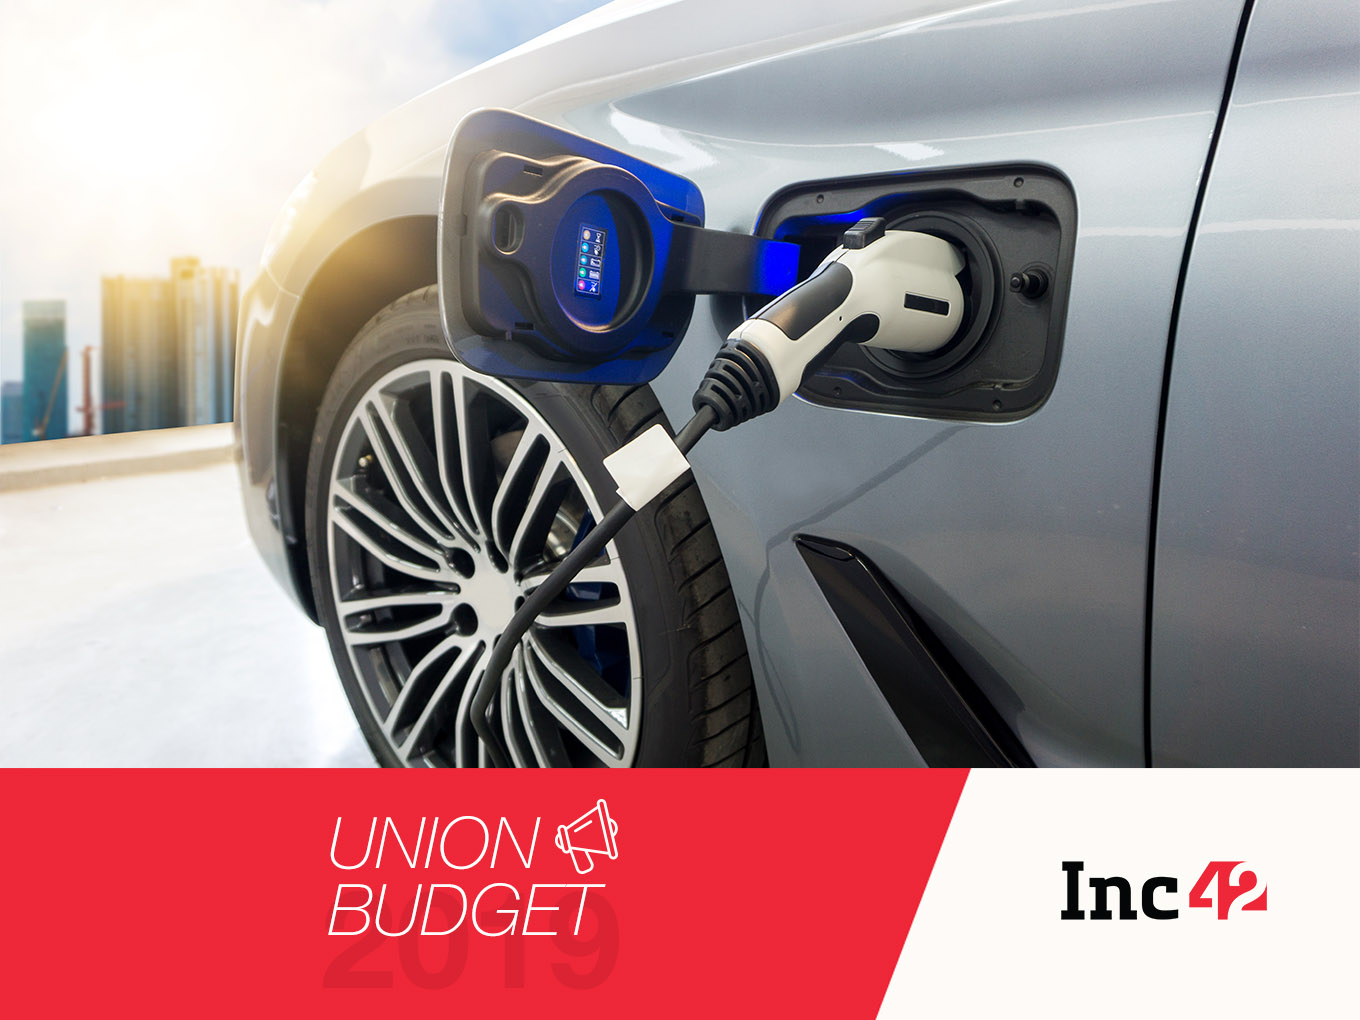 Union Budget 2019: India To Lead Energy Revolution With EVs, But How?